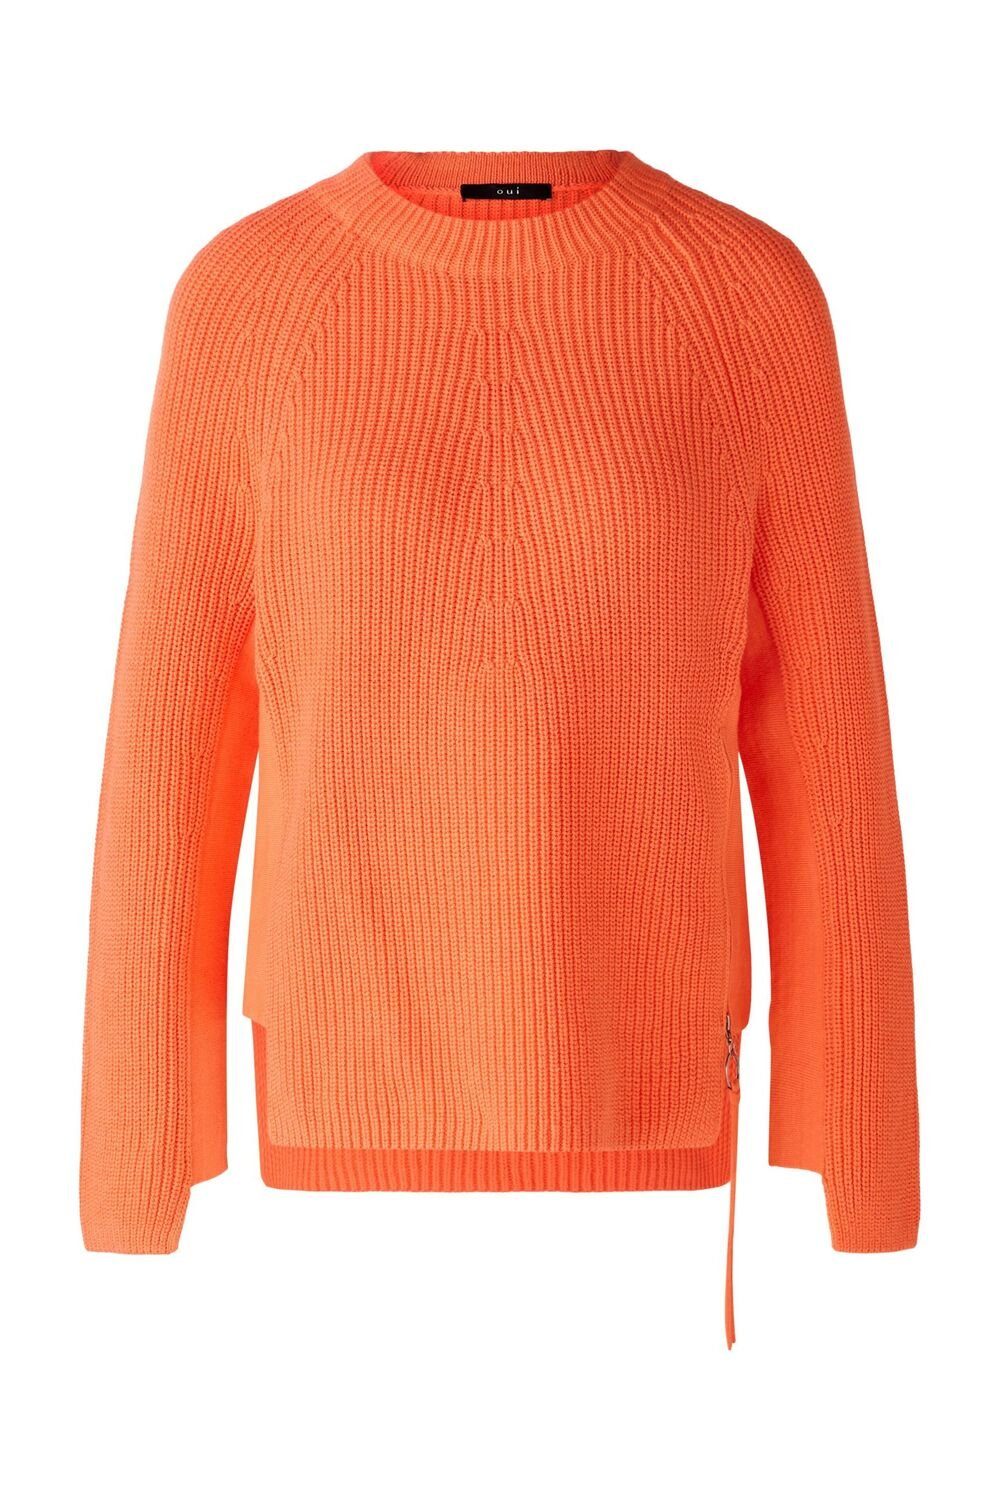 Oui Sweatshirt Pullover, hot coral